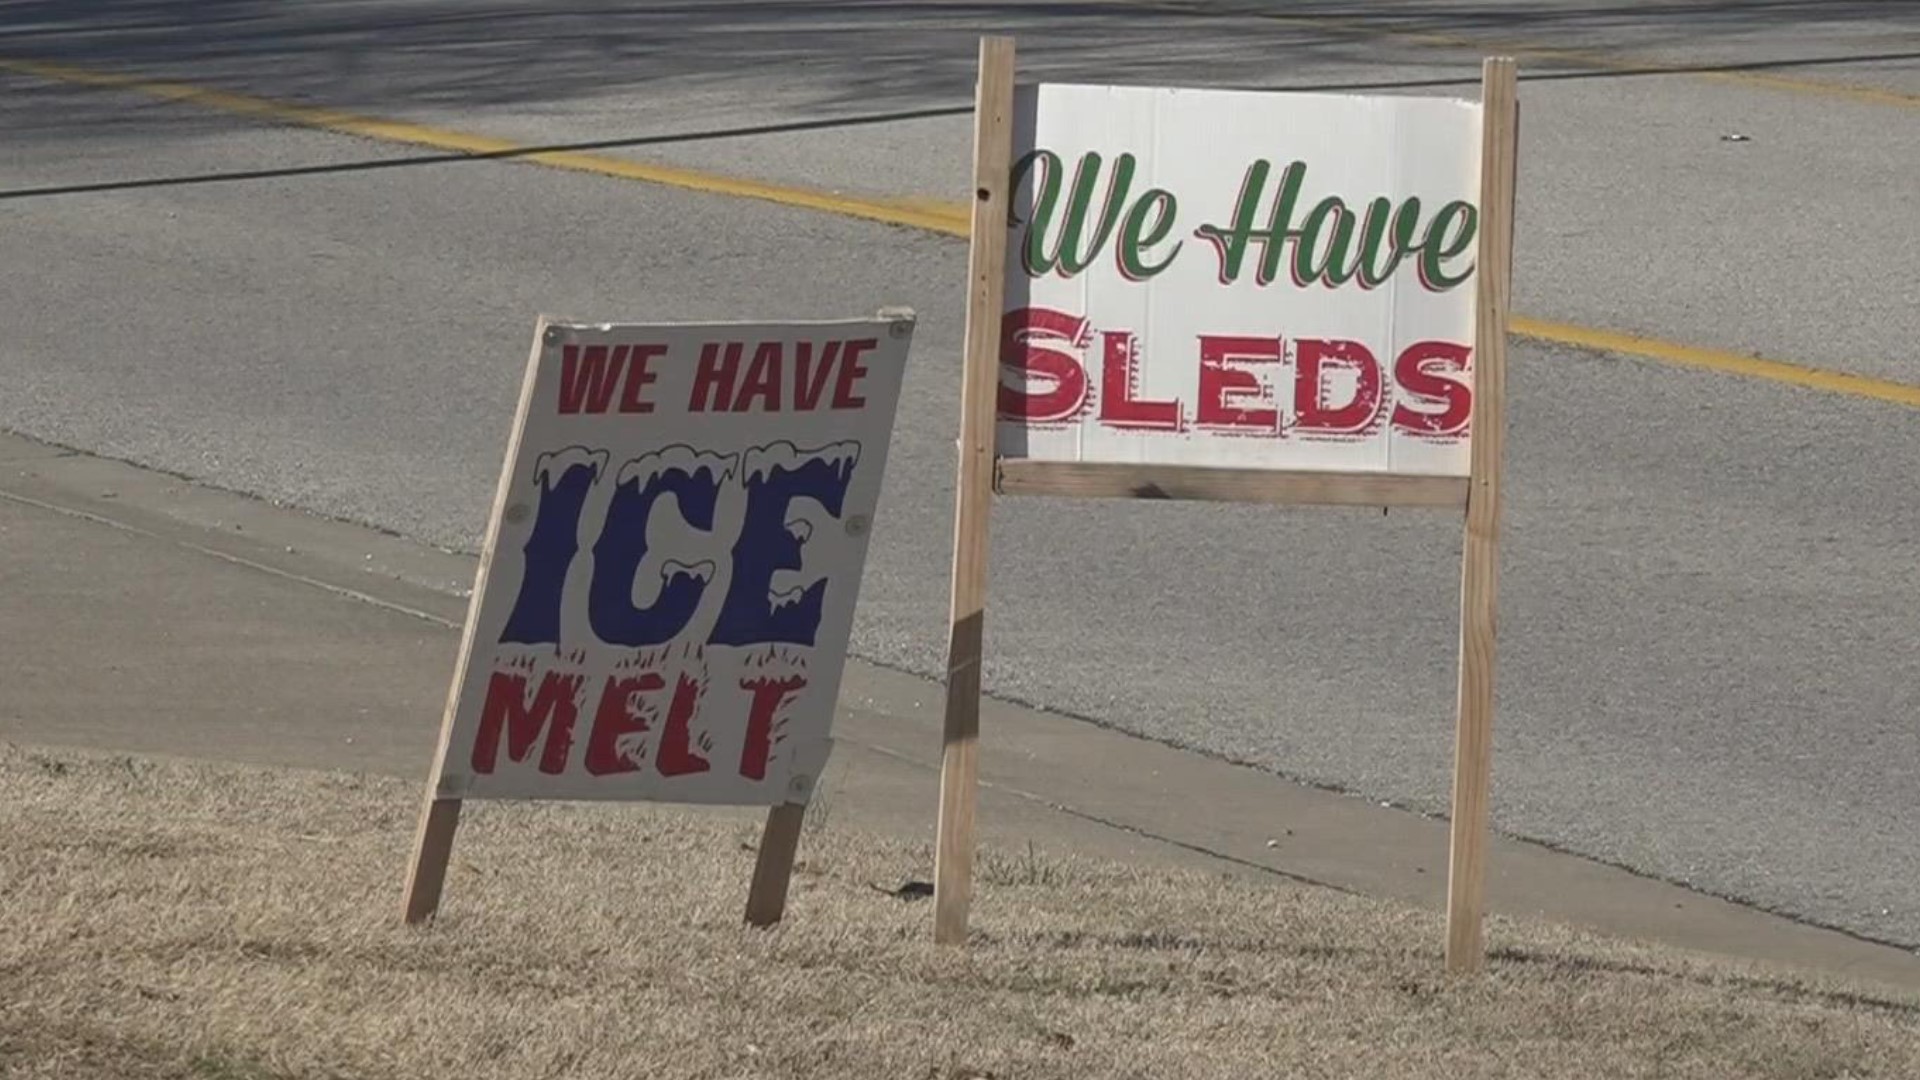 ARDOT is pretreating roads in preparation for the snowfall forecasted across Arkansas, while hardware stores feel the impact of people looking for products.